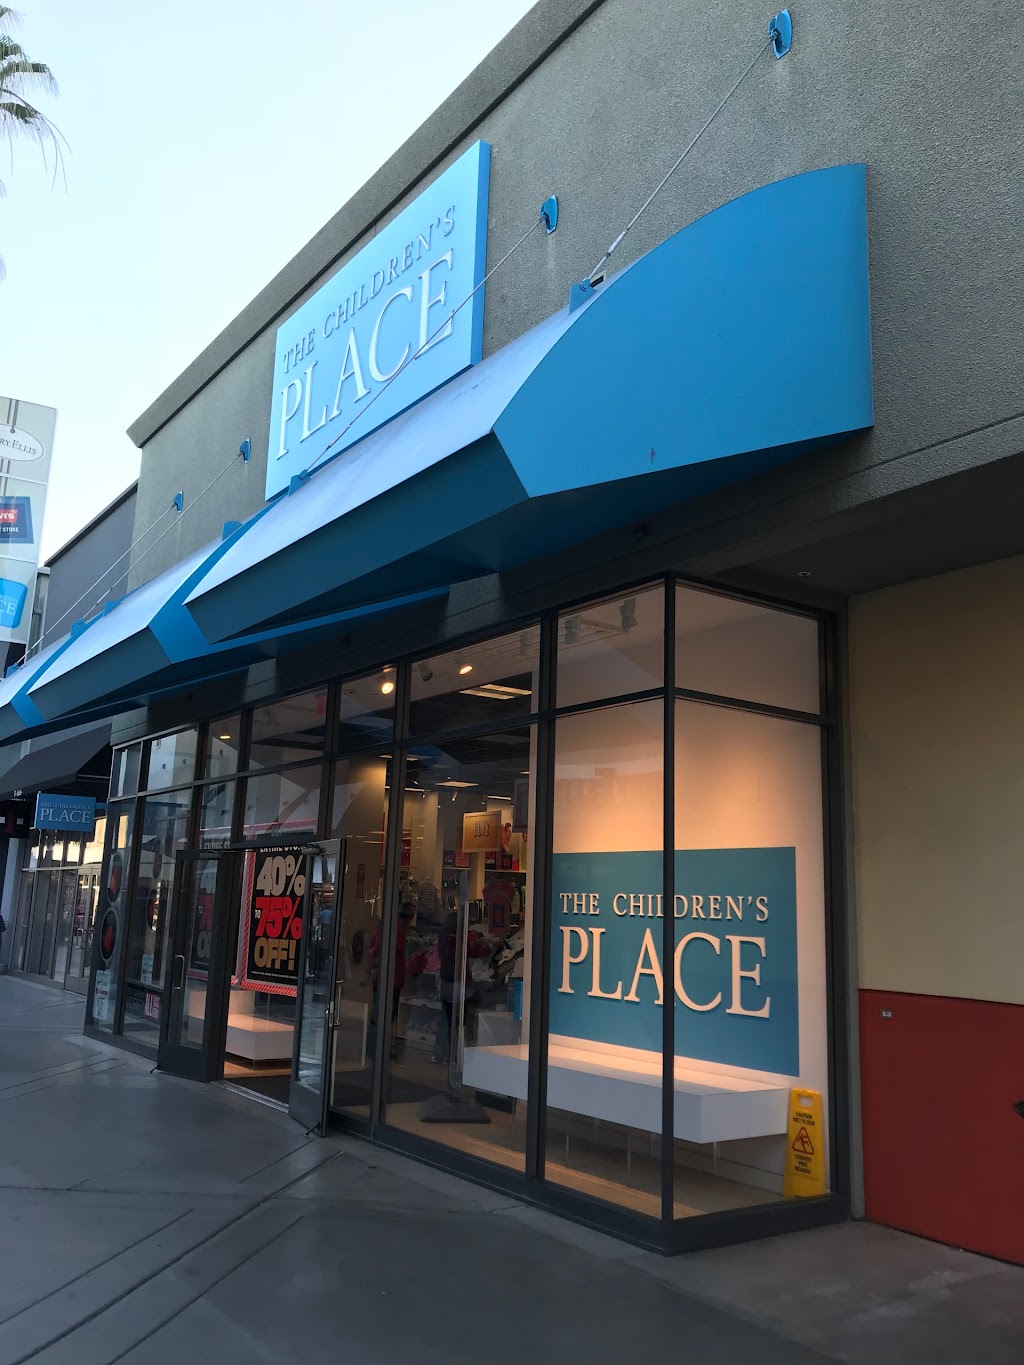 The Childrens Place Outlet | 20 City Blvd W SPACE 607, Orange, CA 92868 | Phone: (714) 940-0375